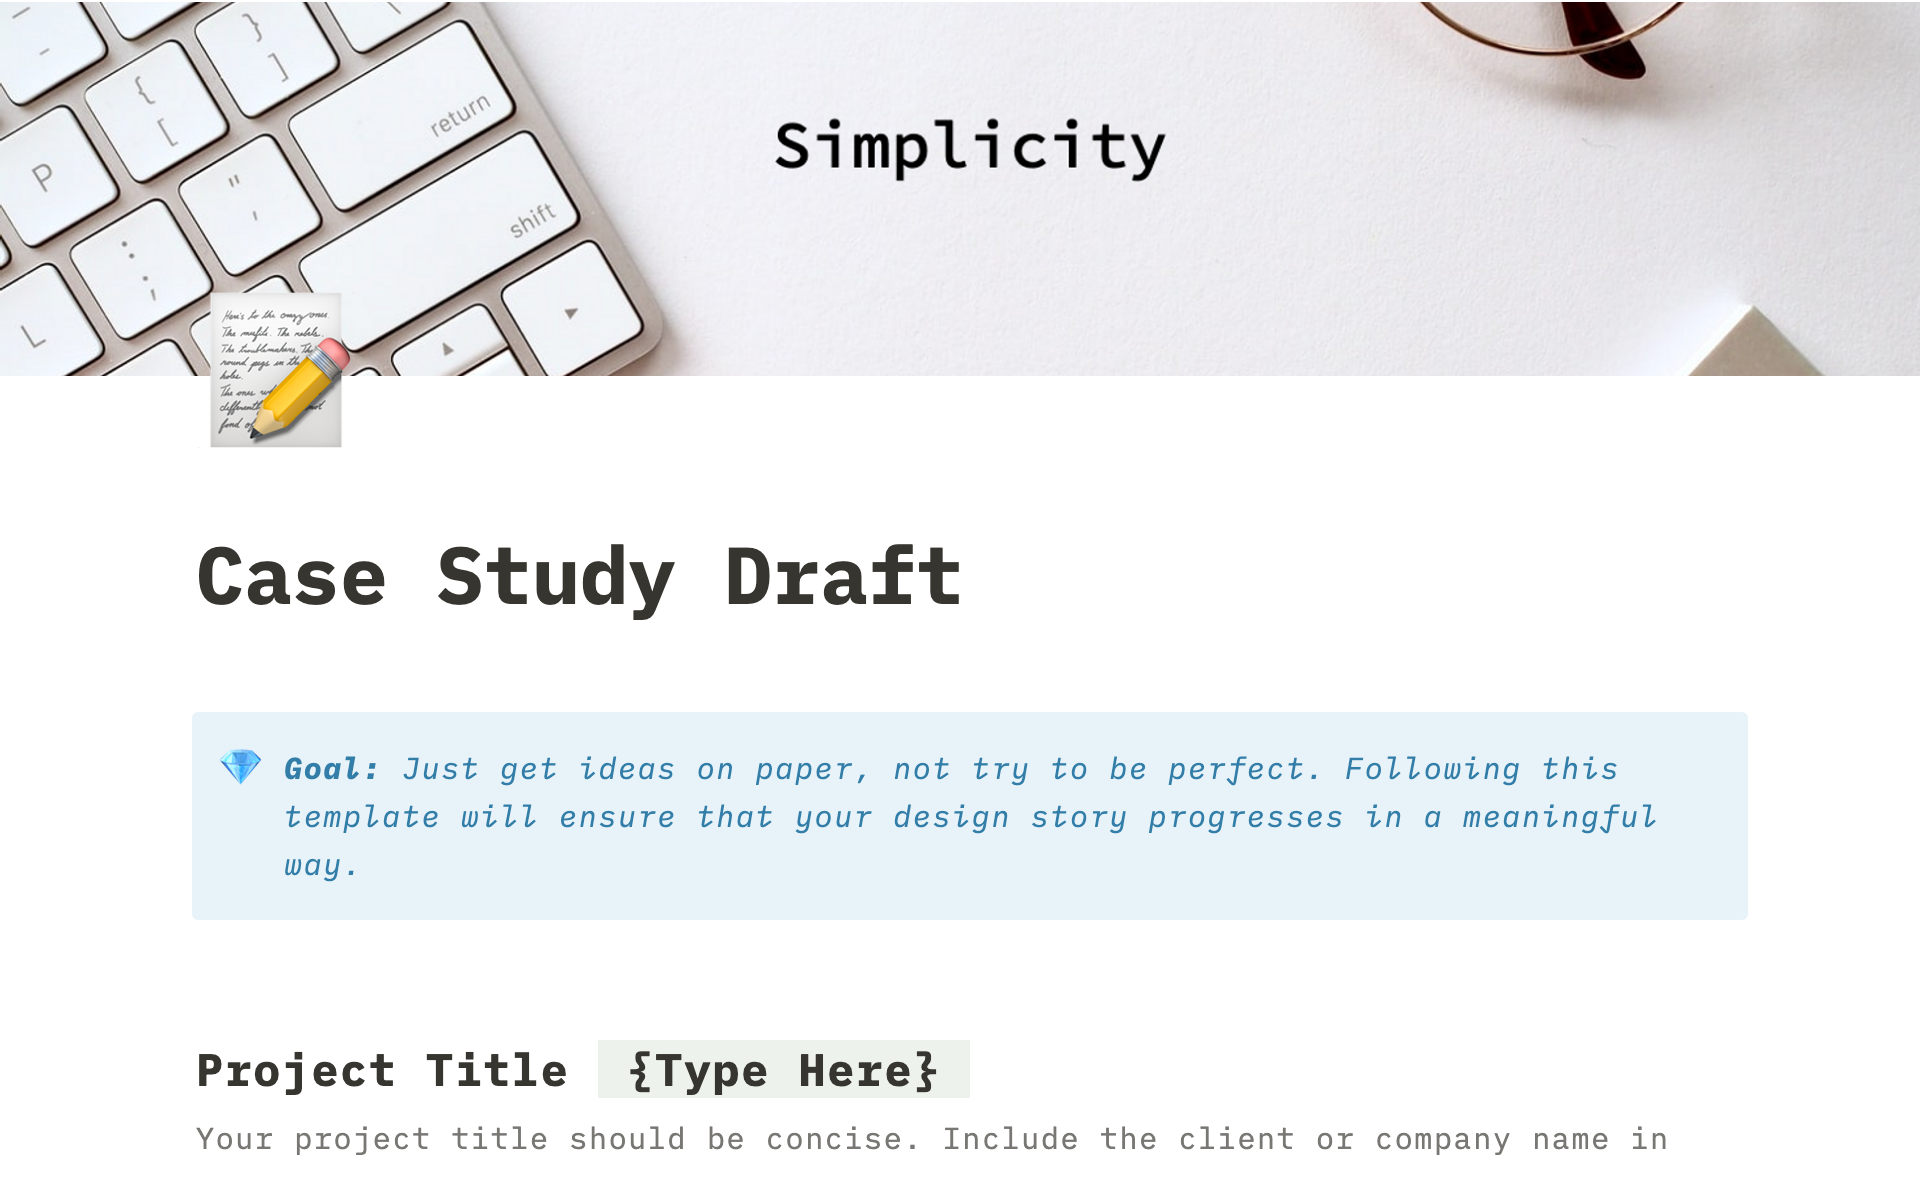 This template is a UI/UX/Product Design framework that helps users create a case study story that sells.